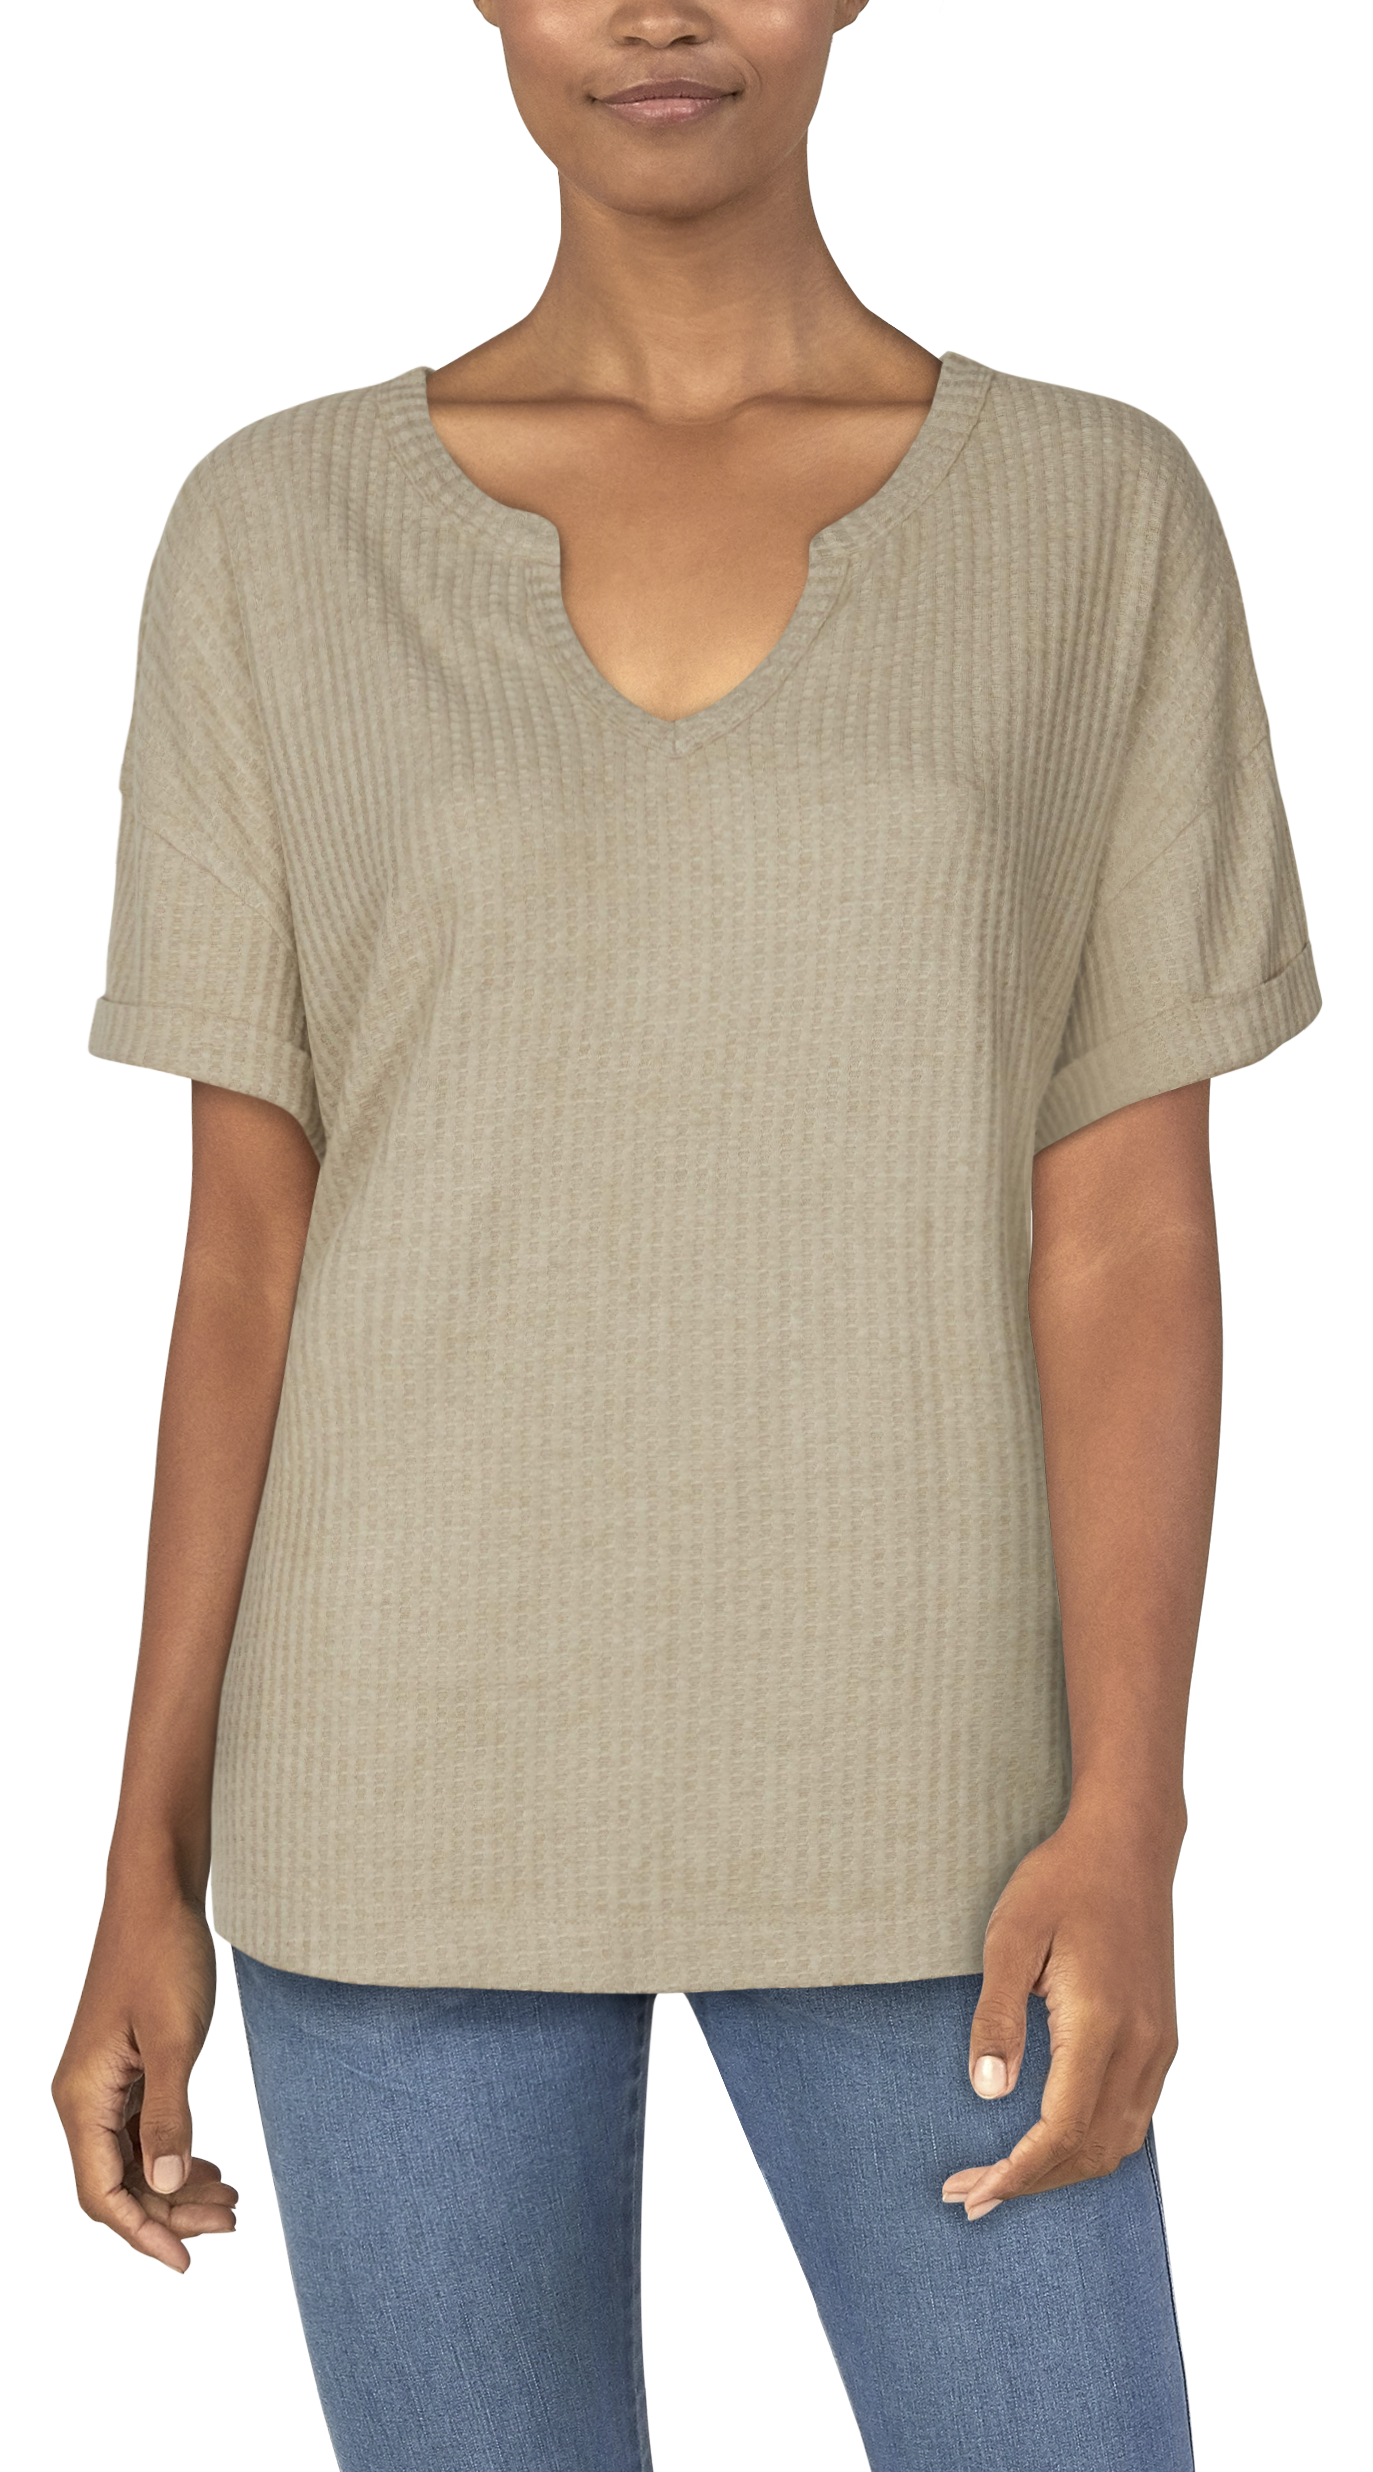 Natural Reflections Brush Creek Waffle Short-Sleeve Shirt for Ladies - Oatmeal Heather - 2X